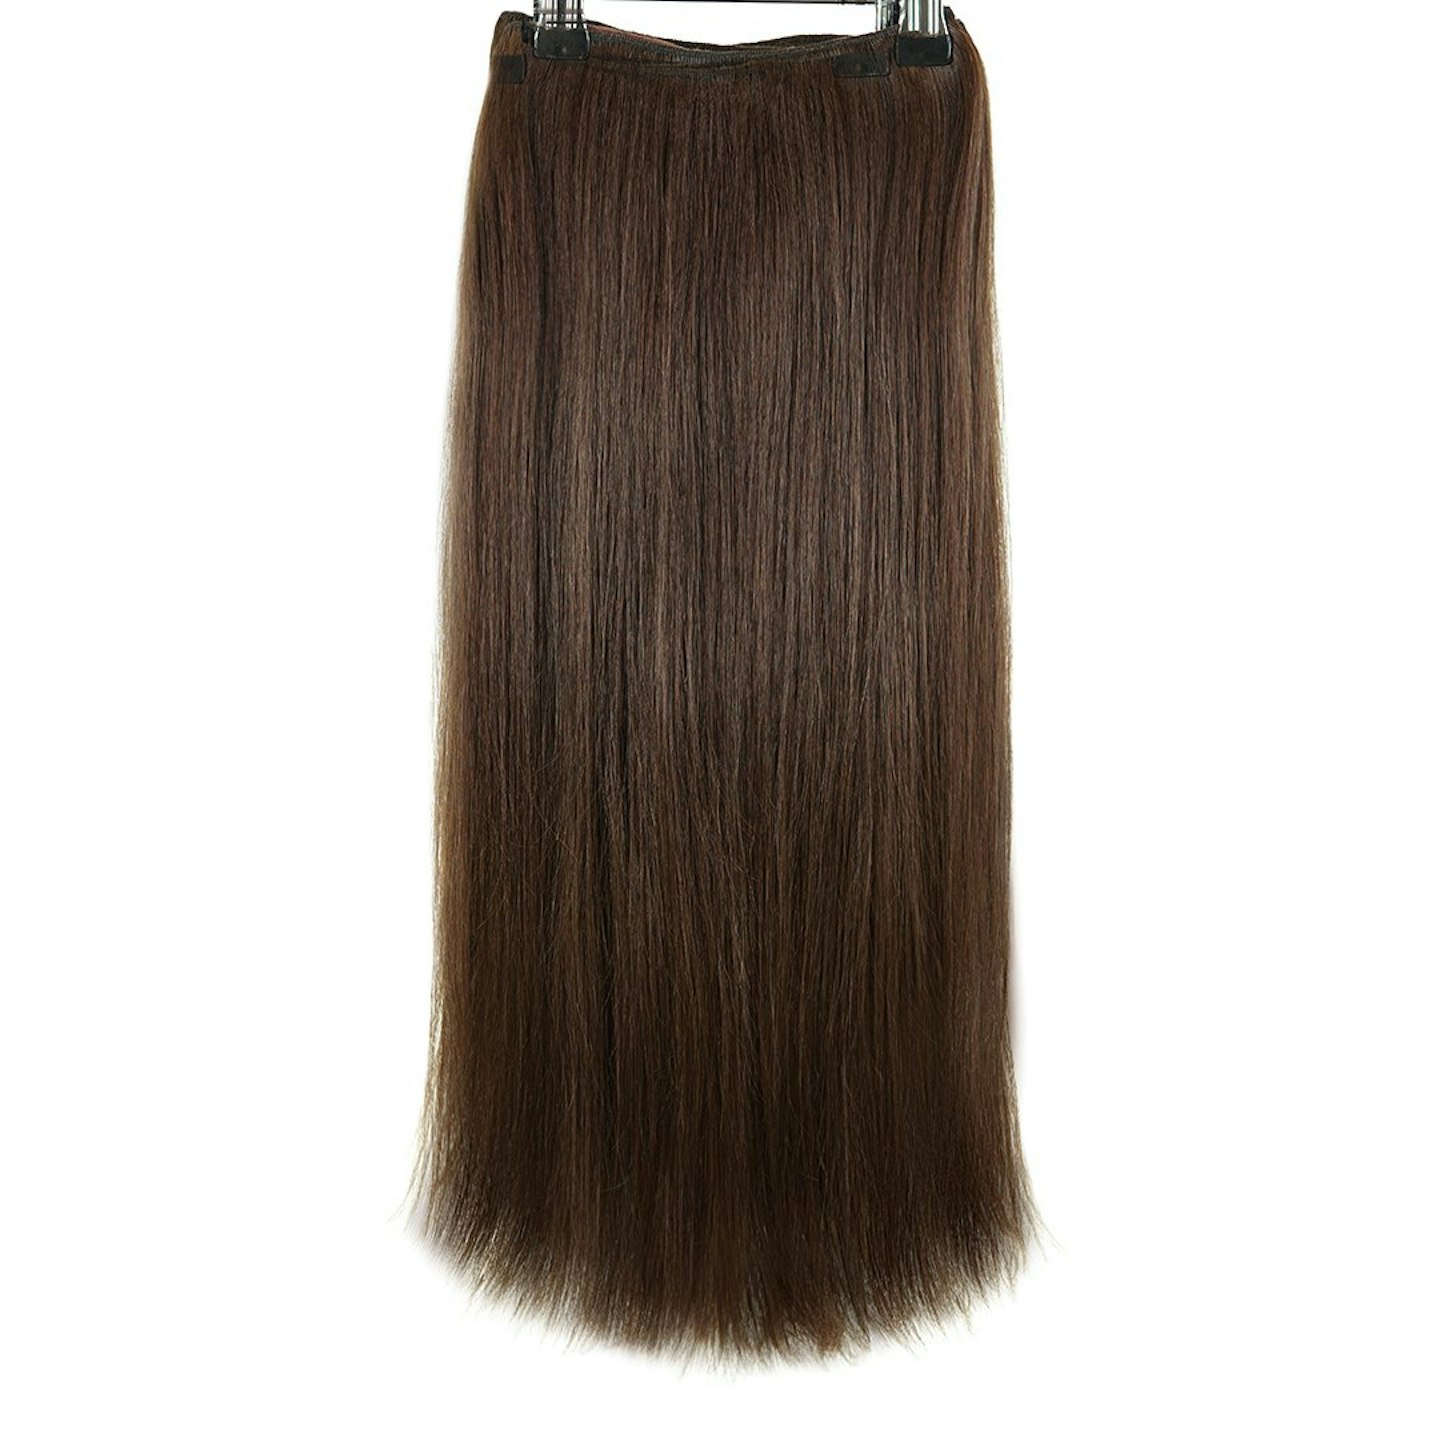 Clip In 20" Weft Human Hair Extensions - Dark Brown No reviews